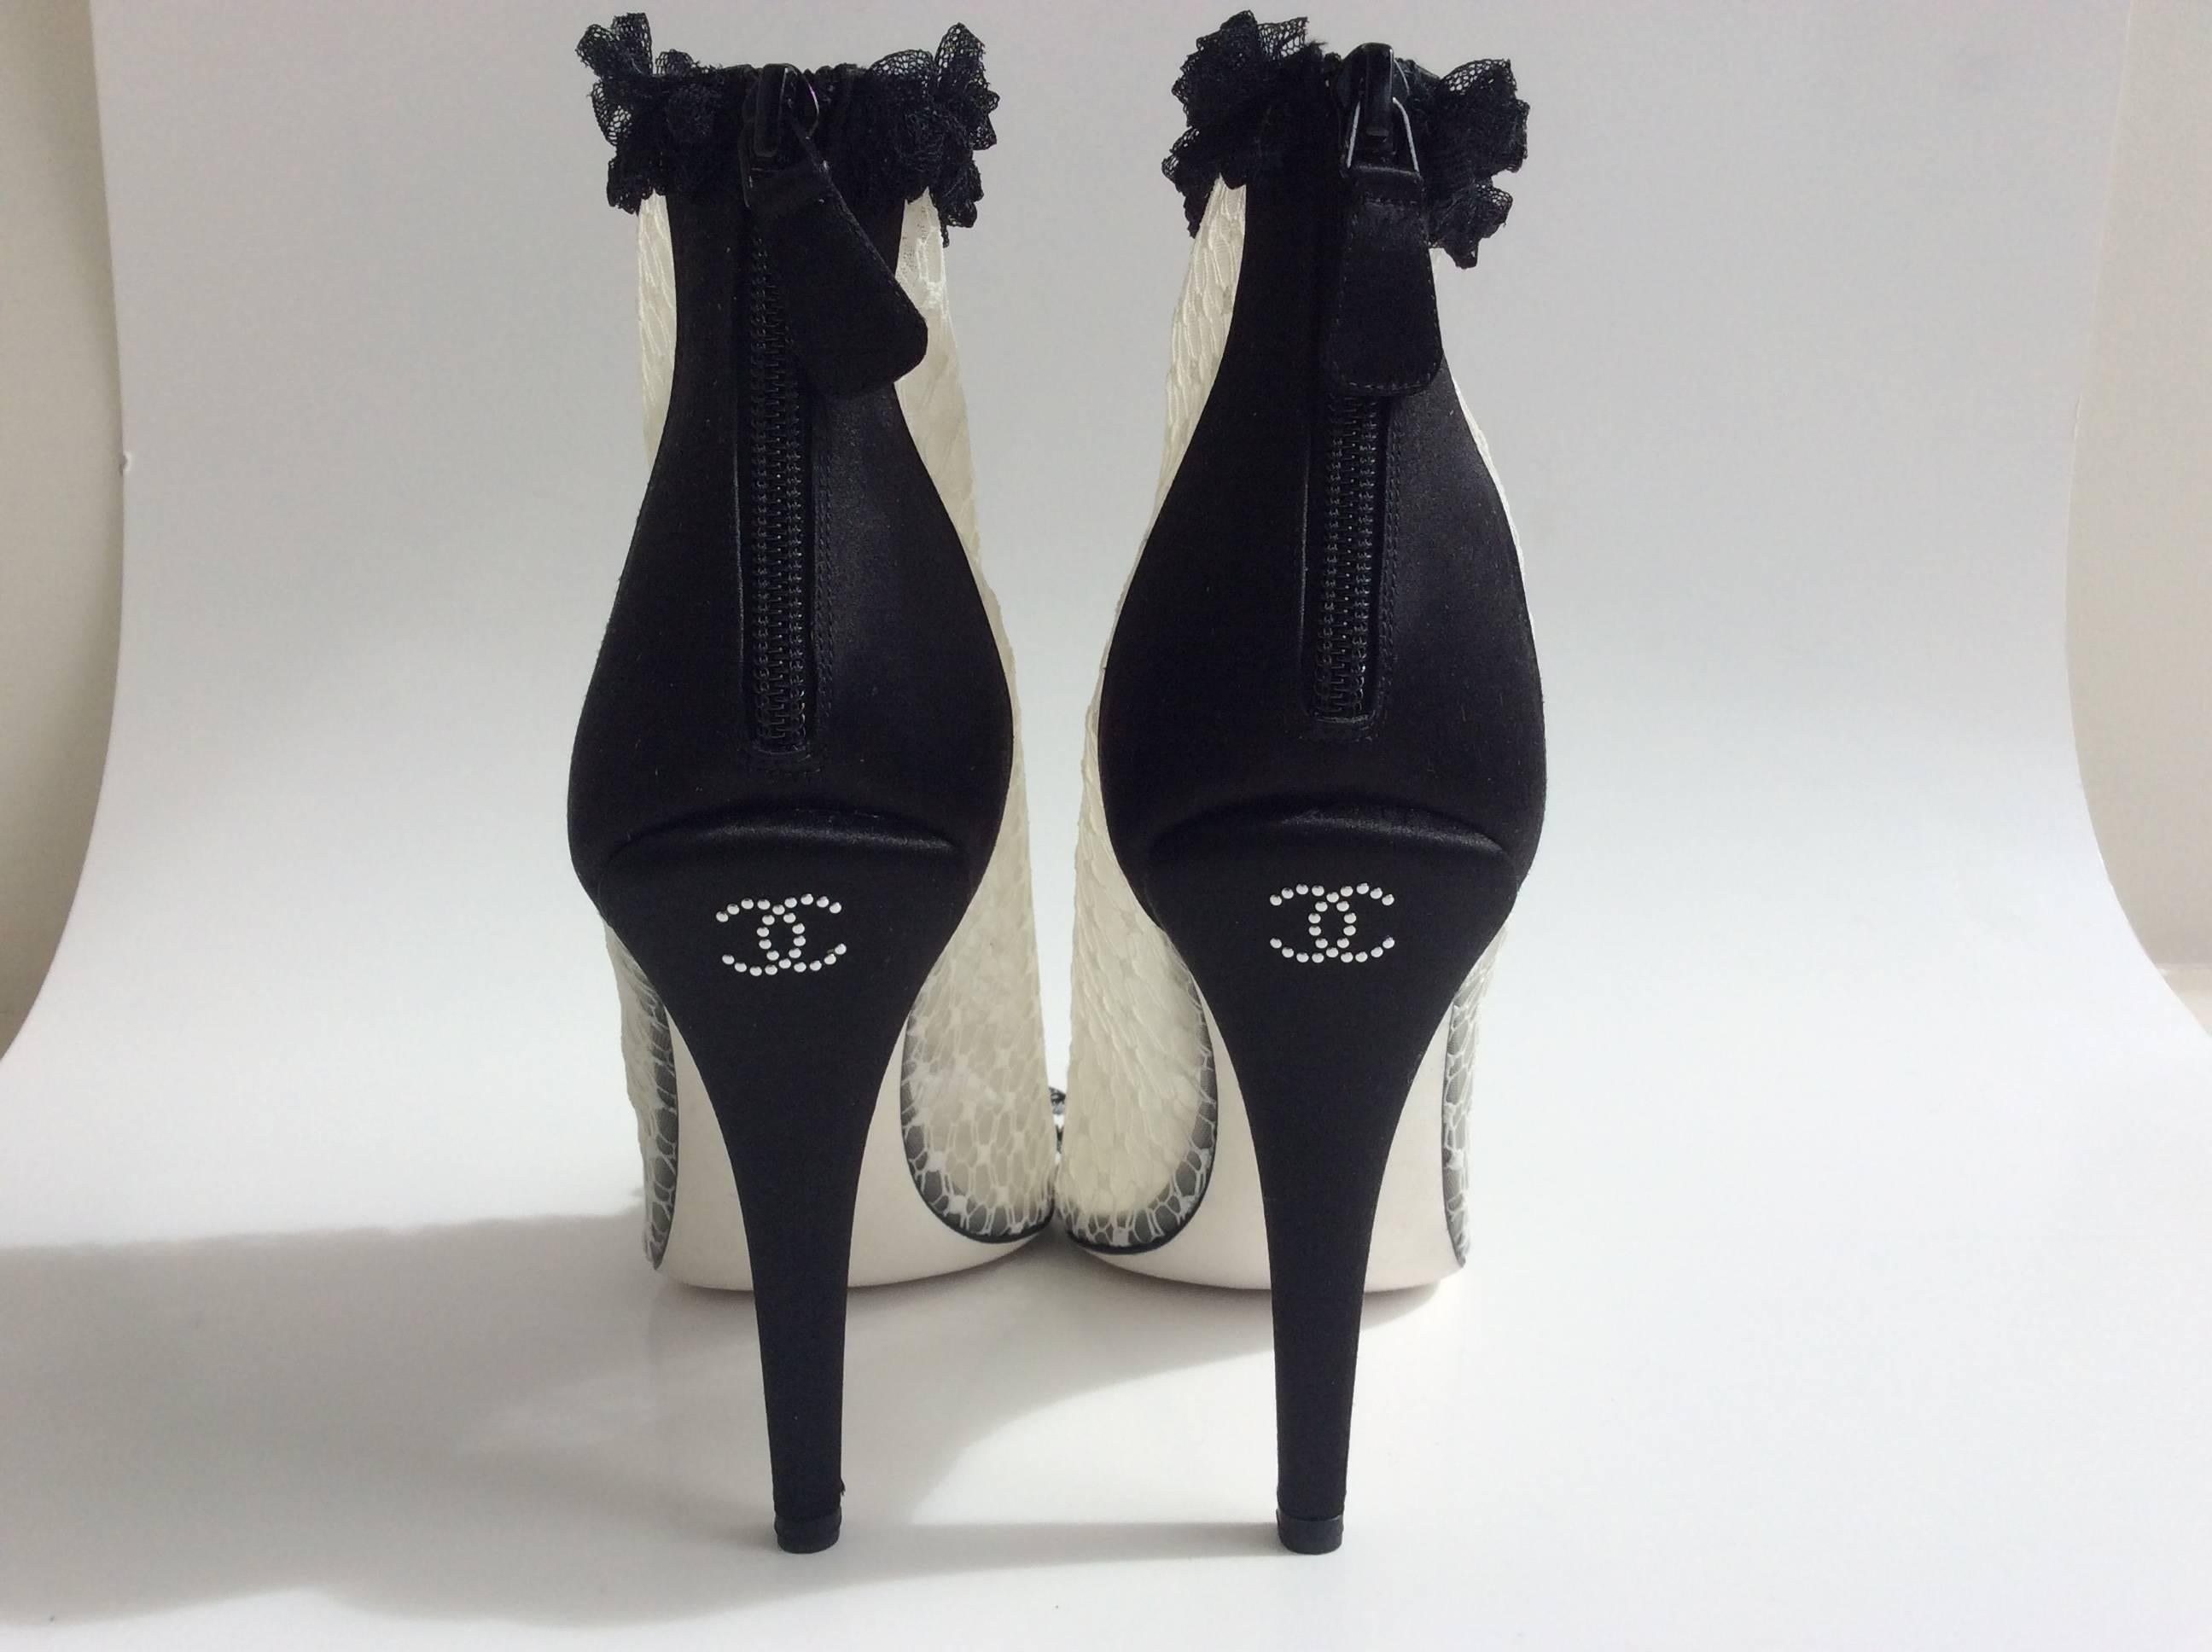  White Chanel lace booties with a black lace trim around the ankles and down the middle of the foot and across the toes. The back of the shoe and the 4.5 in heel are in black satin. The upper part of the heel displays the iconic CC emblem in tiny